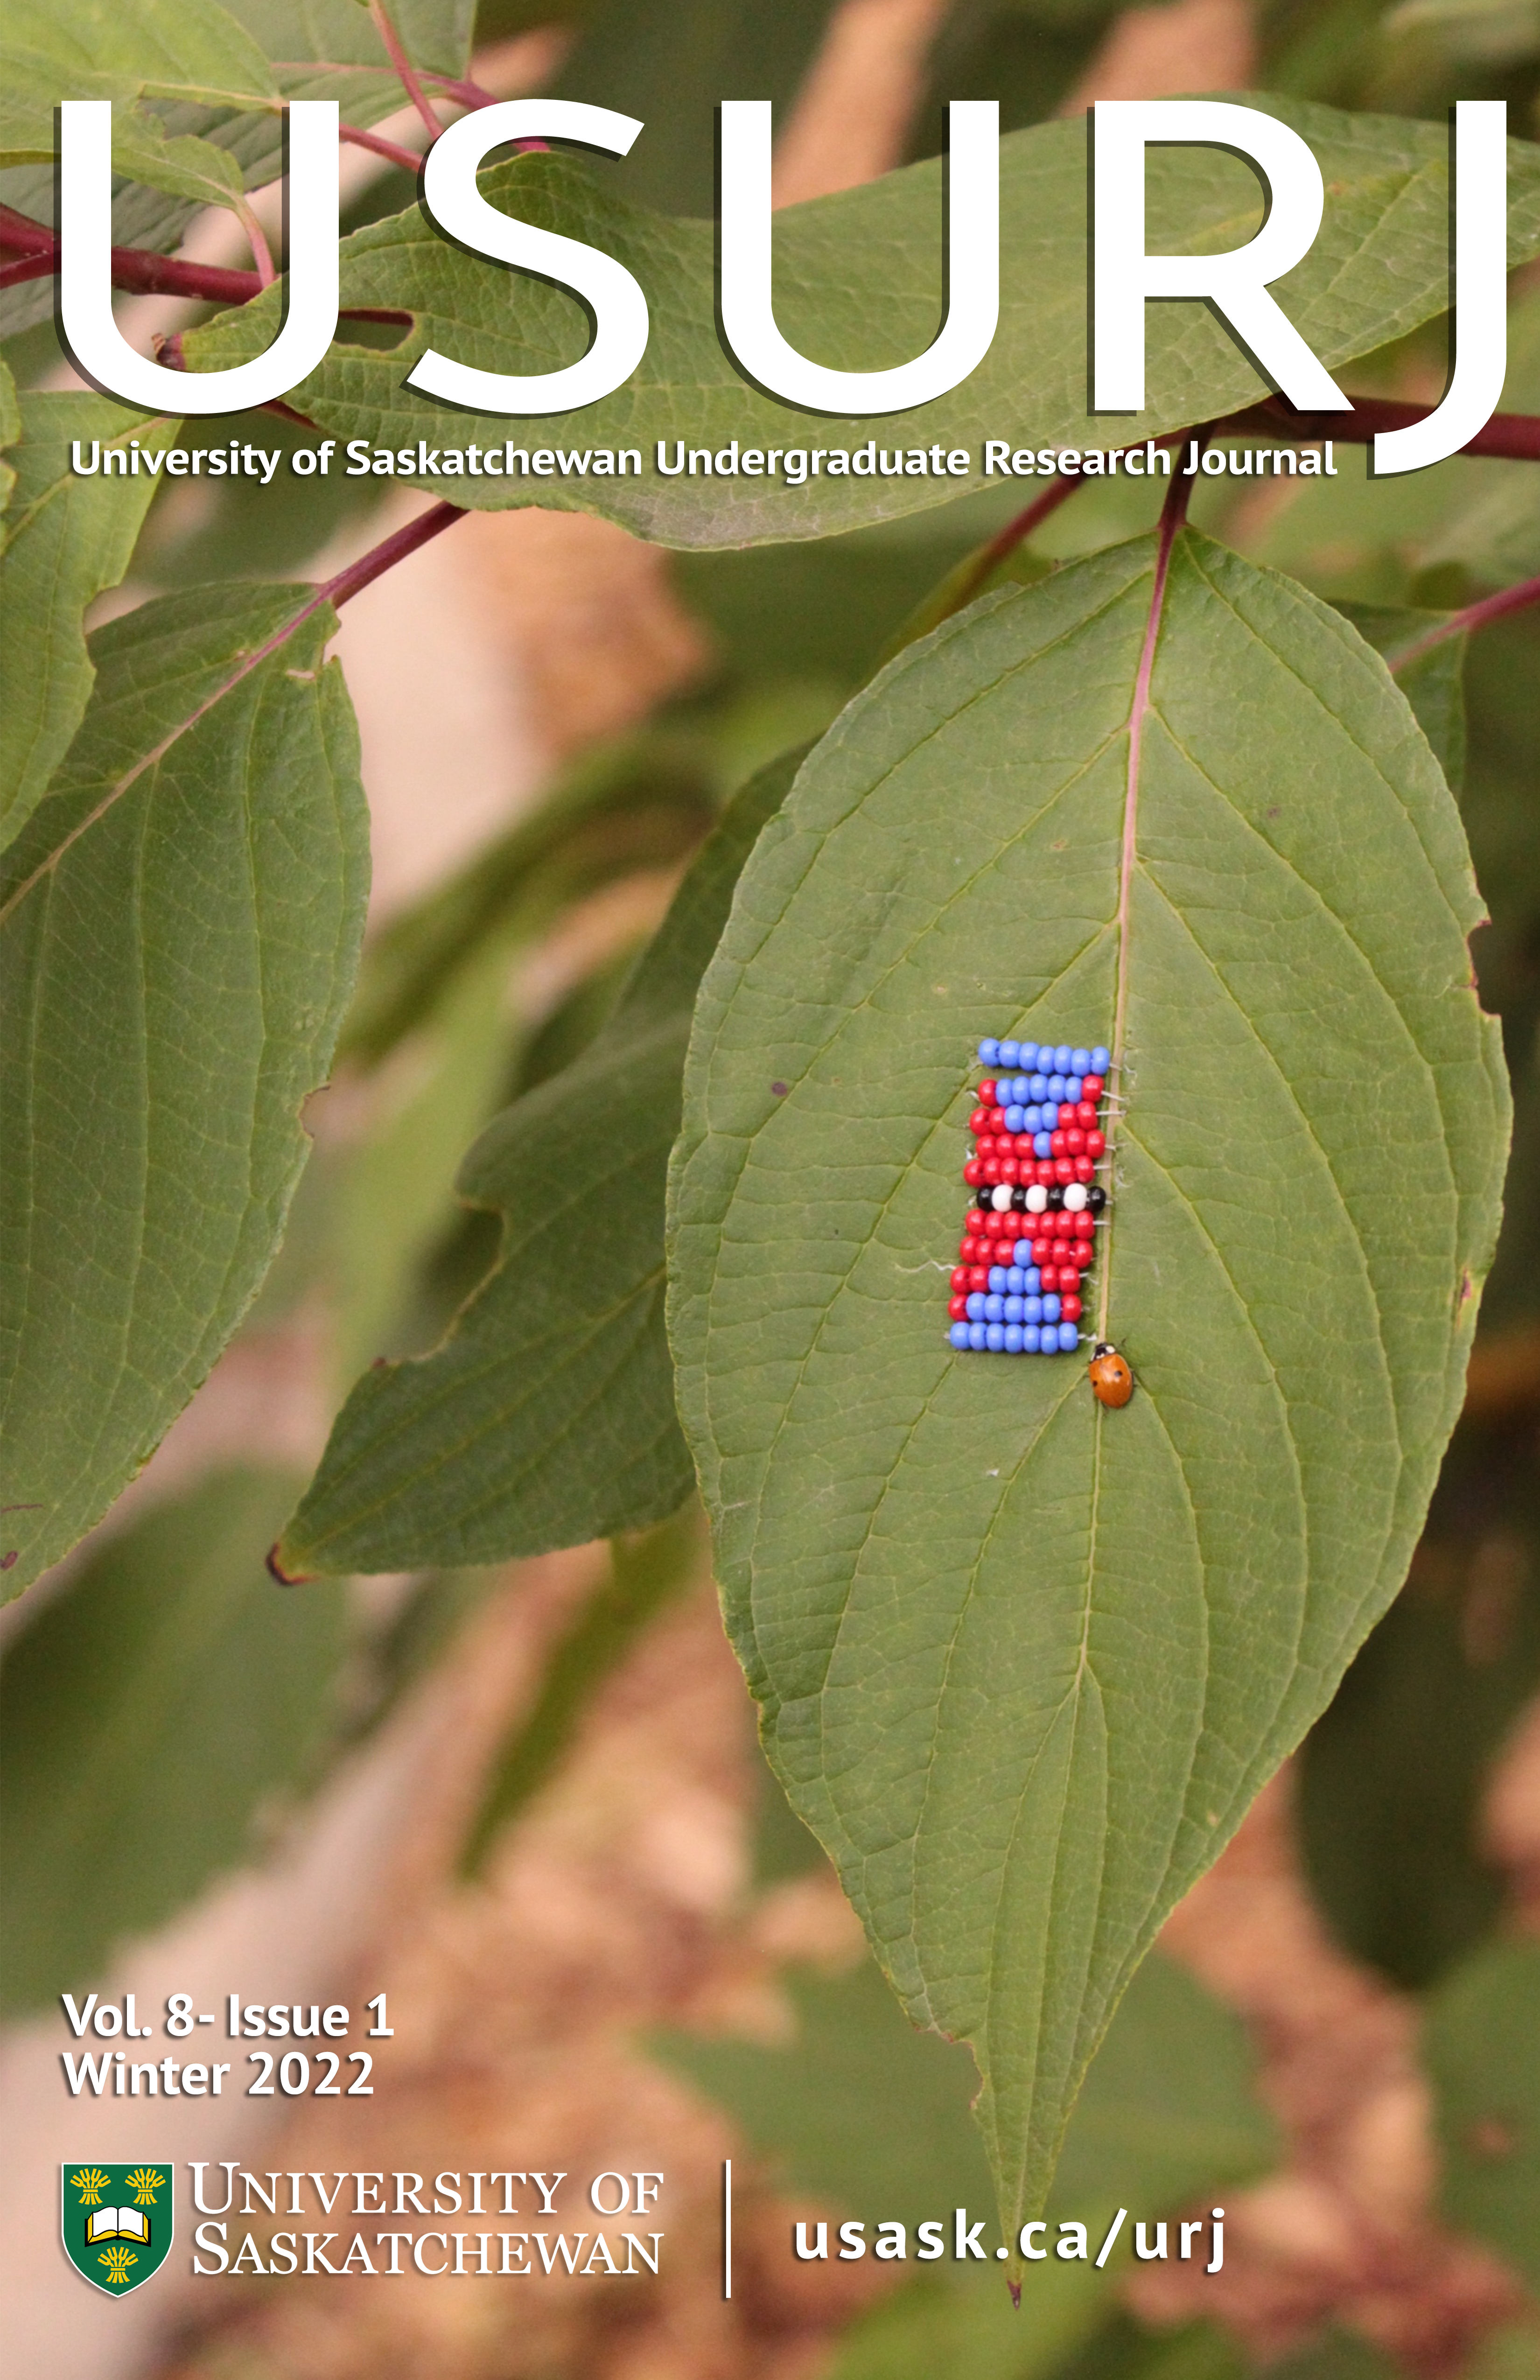 A photograph of red and blue ibeading stitched onto a green leaf with a ladybug crawling next to it.